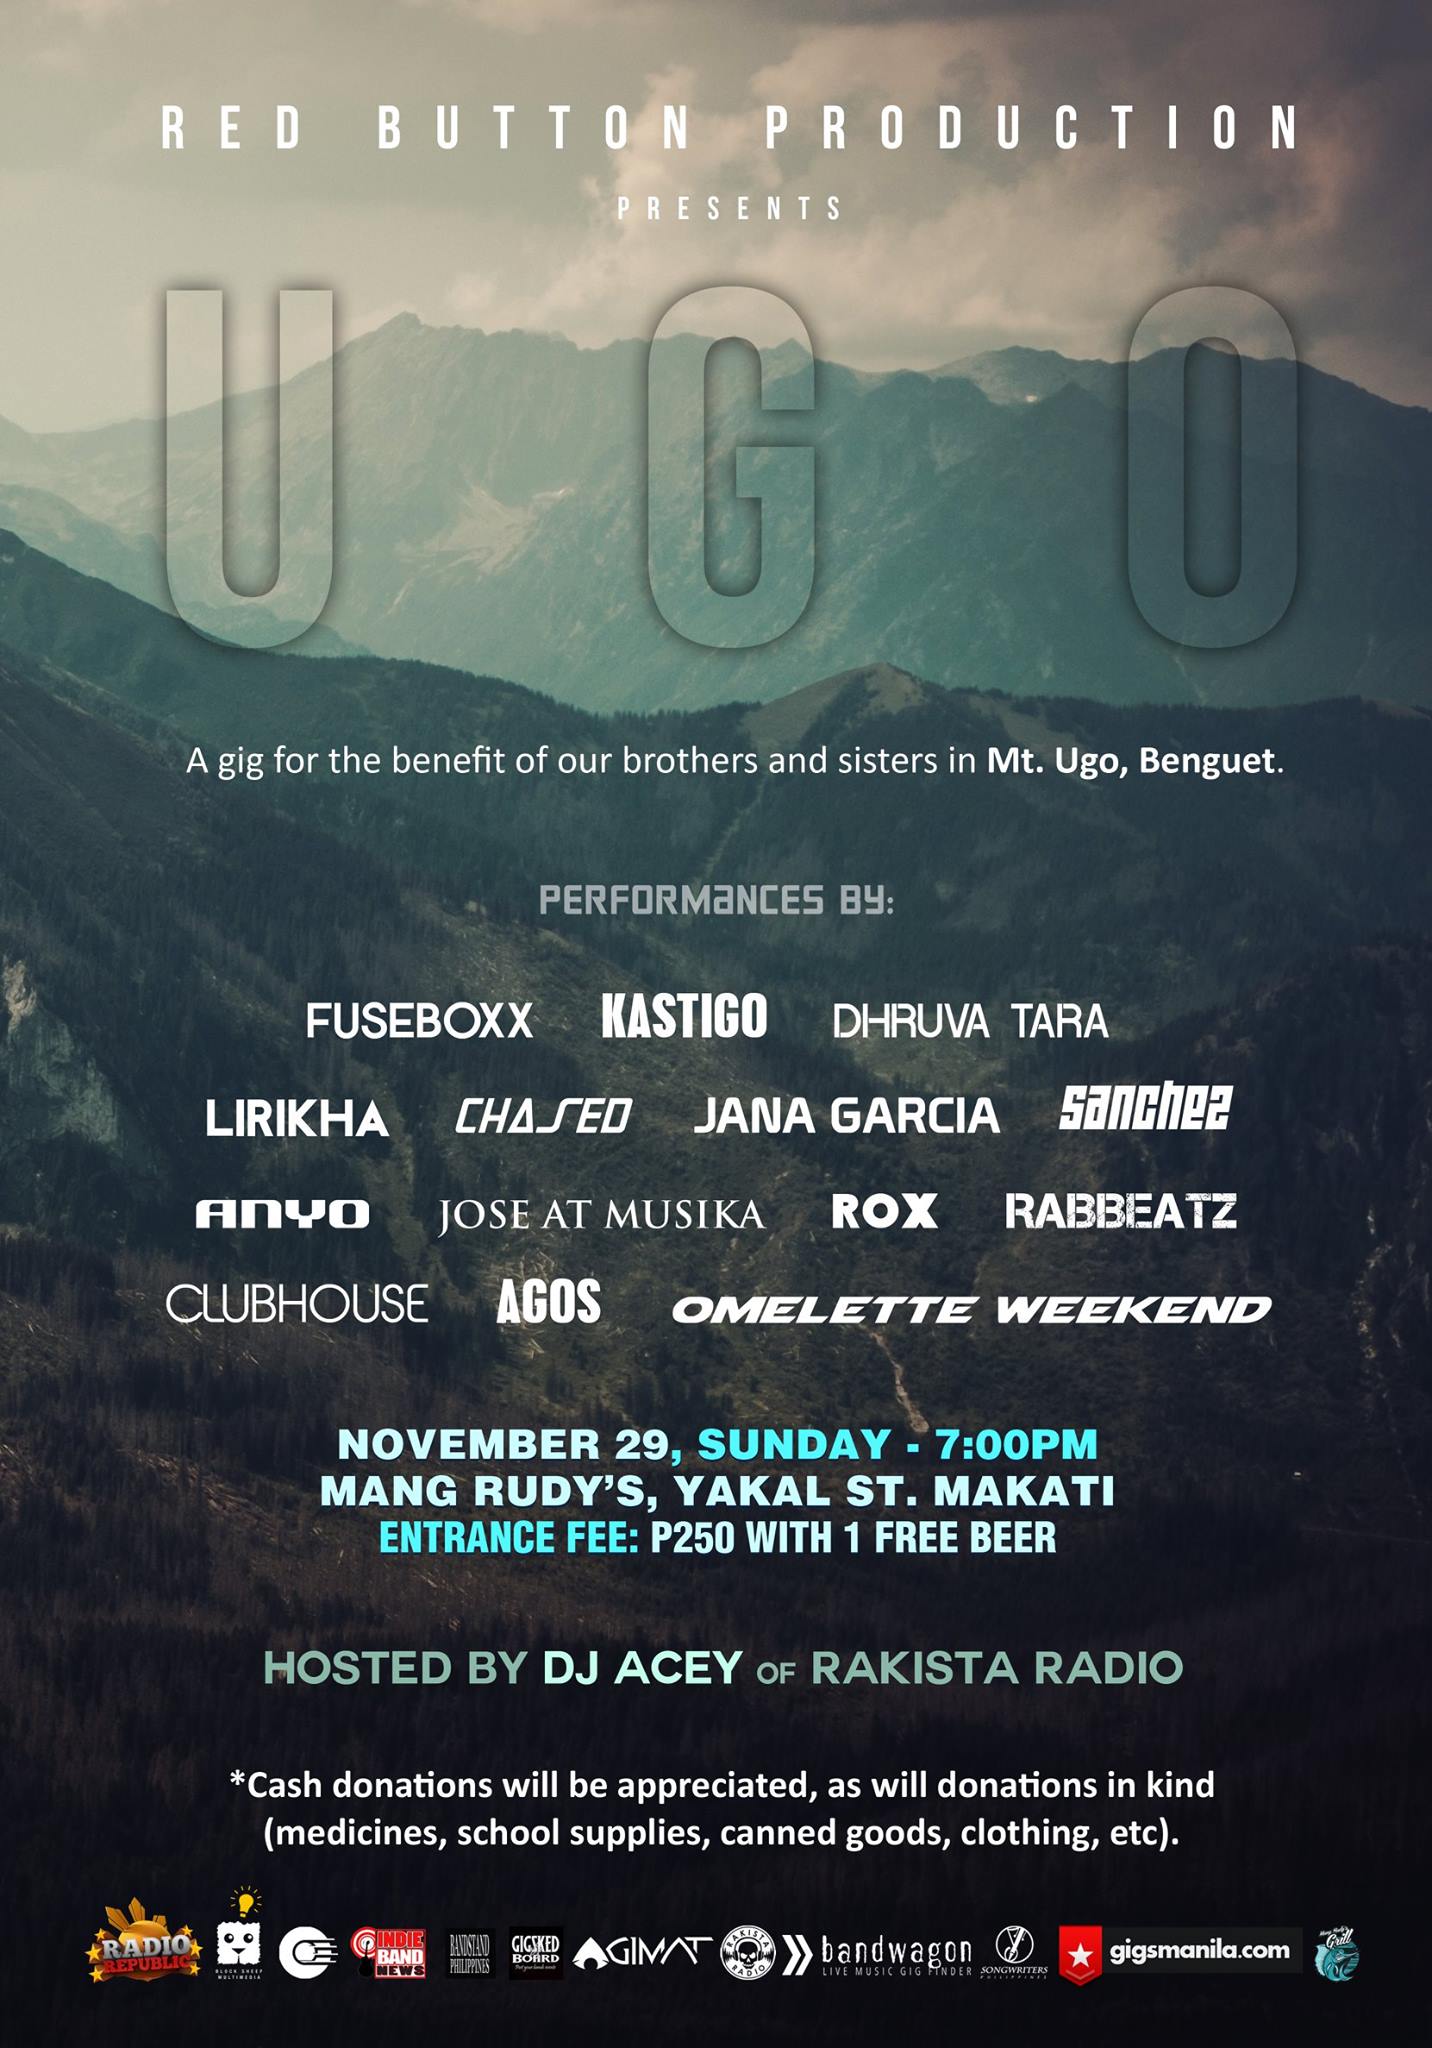 Sunday, November 29 Jose C. Delos Reyes As November draws to a close, home-grown indie acts play for a cause. We invite you to come together in a gig for the benefit of our brothers and sisters in Mt. Ugo, Benguet. *Cash donations will be appreciated, as will donations in kind (medicines, school supplies, canned goods, clothing, etc). For further details, contact Jose Delos Reyes at 09178530179. Red Button Production "UGO" November 29, Sunday | 7:00PM Mang Rudy's, Yakal St. Makati Entrance Fee: P250 with one beer Hosted by DJ Acey of Rakista Radio performances by: fuseboxx KASTIGO Dhruva Tara Anyo JOSE at Musika ROX Puno Band Lirikha Chased Pilipinas Jana Garcia Clubhouse Agos PH Omelette Weekend Rabbeatz Event Link: https://www.facebook.com/events/788694147923992/